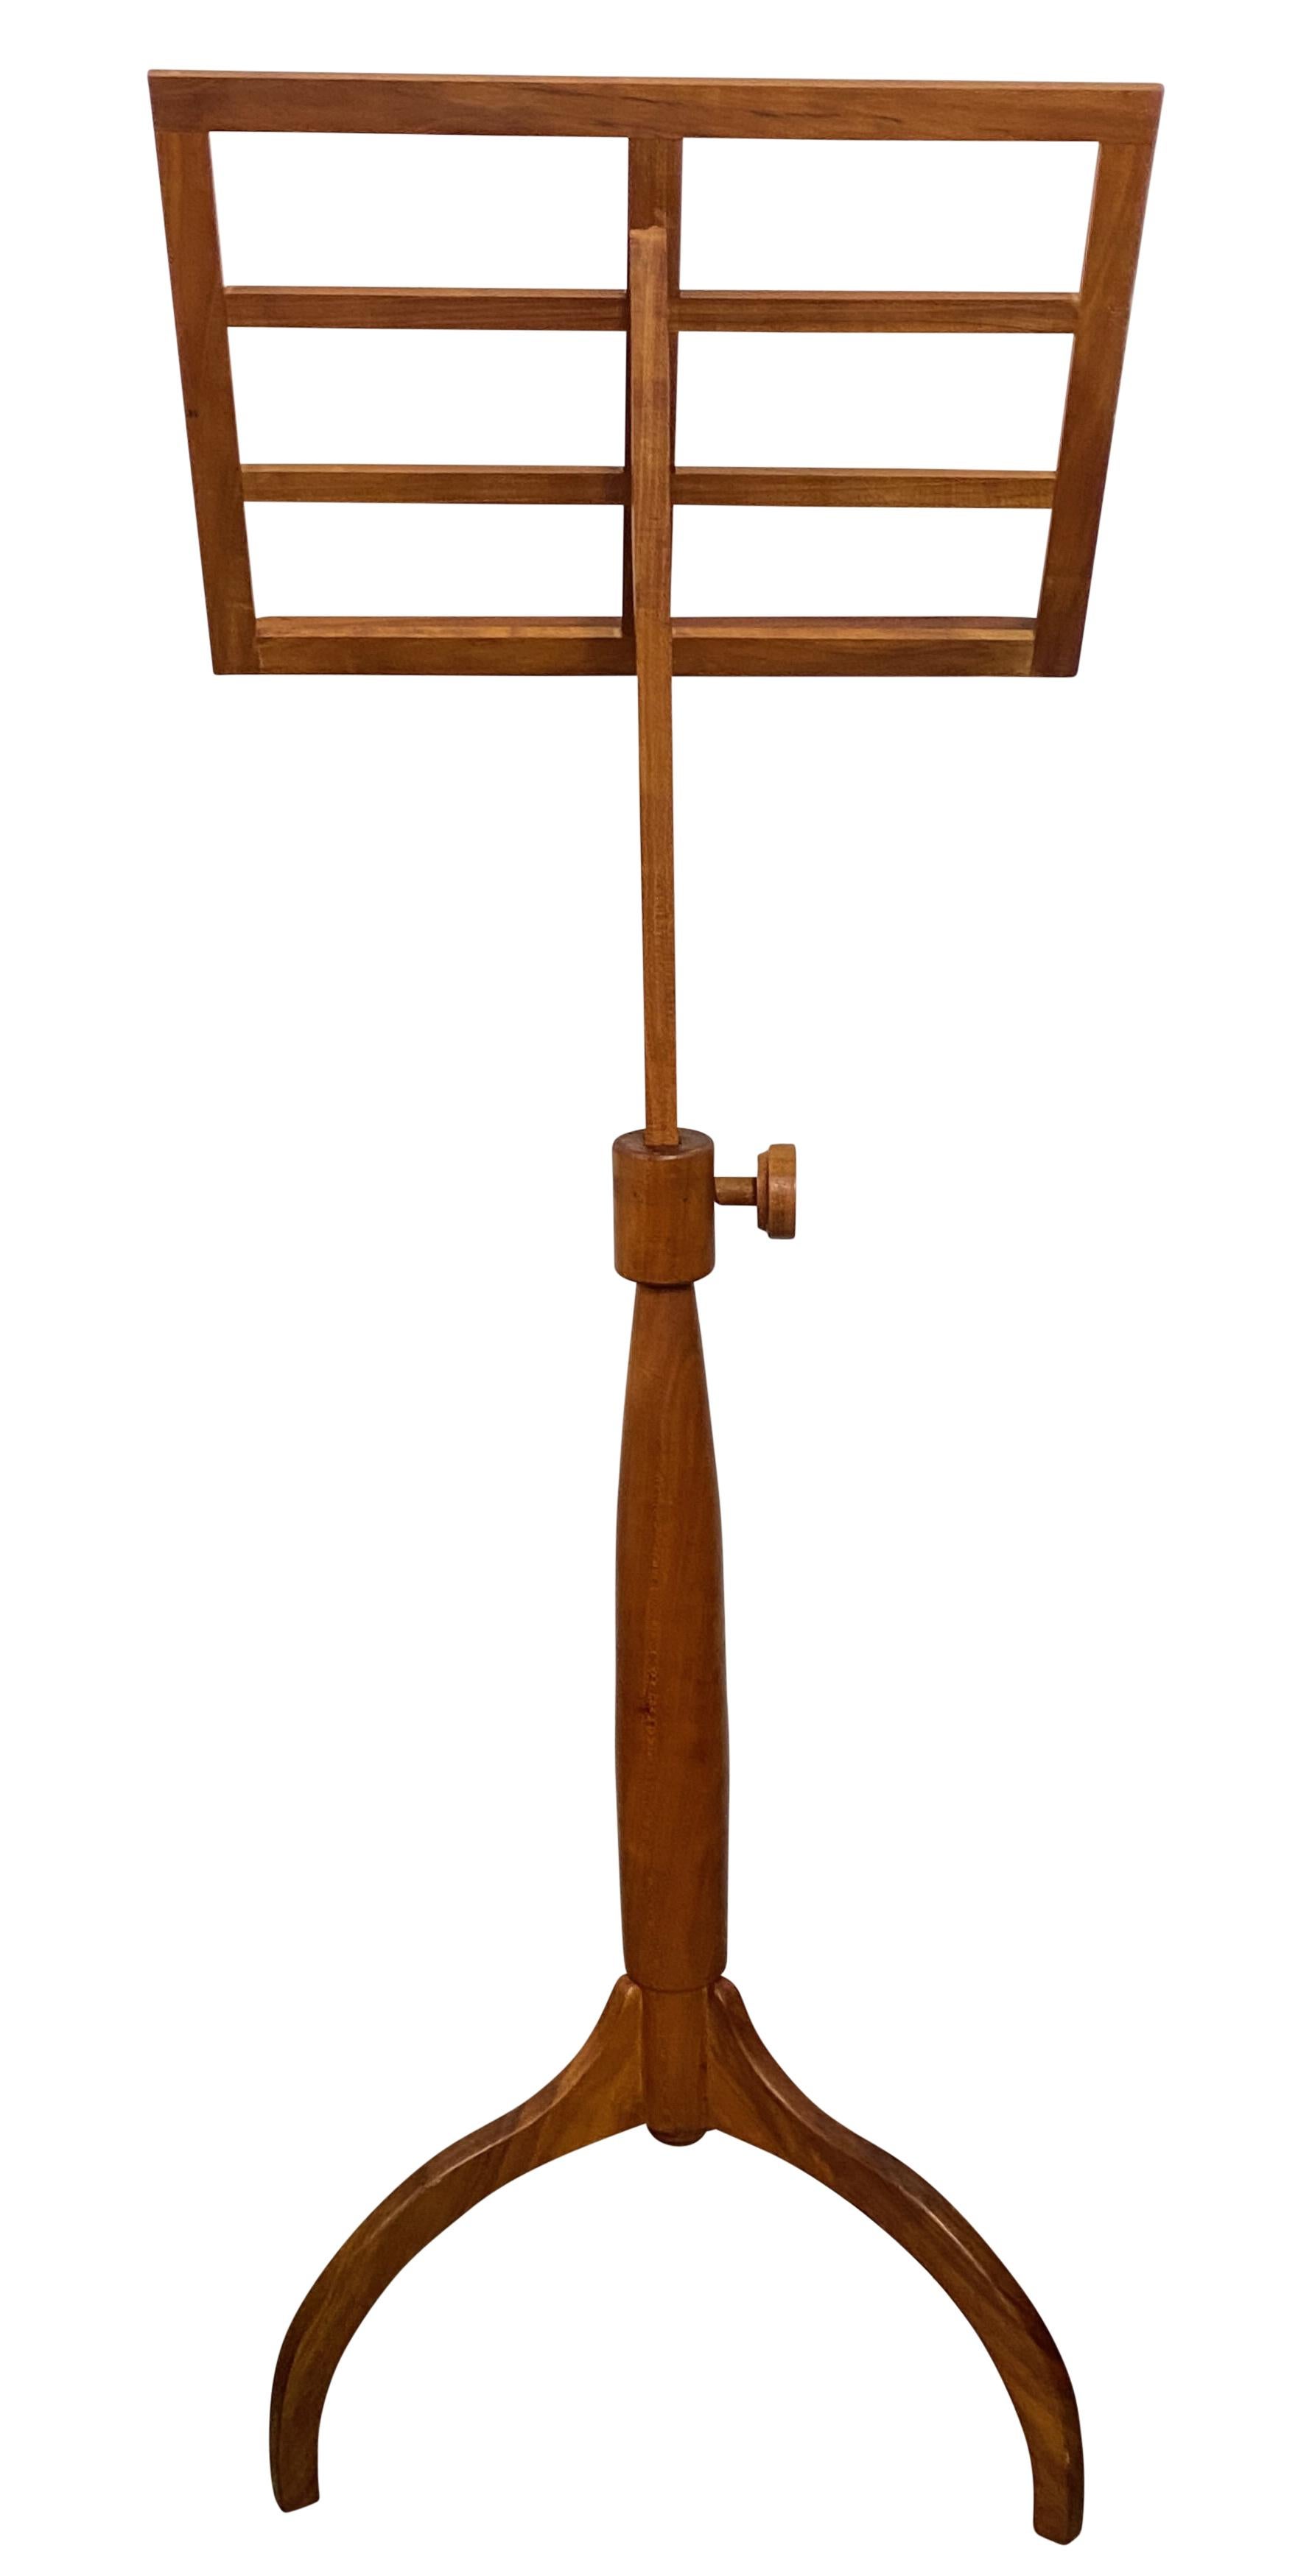 Shaker Work Shop Style Cherry Wood Music Stand In Good Condition For Sale In San Francisco, CA